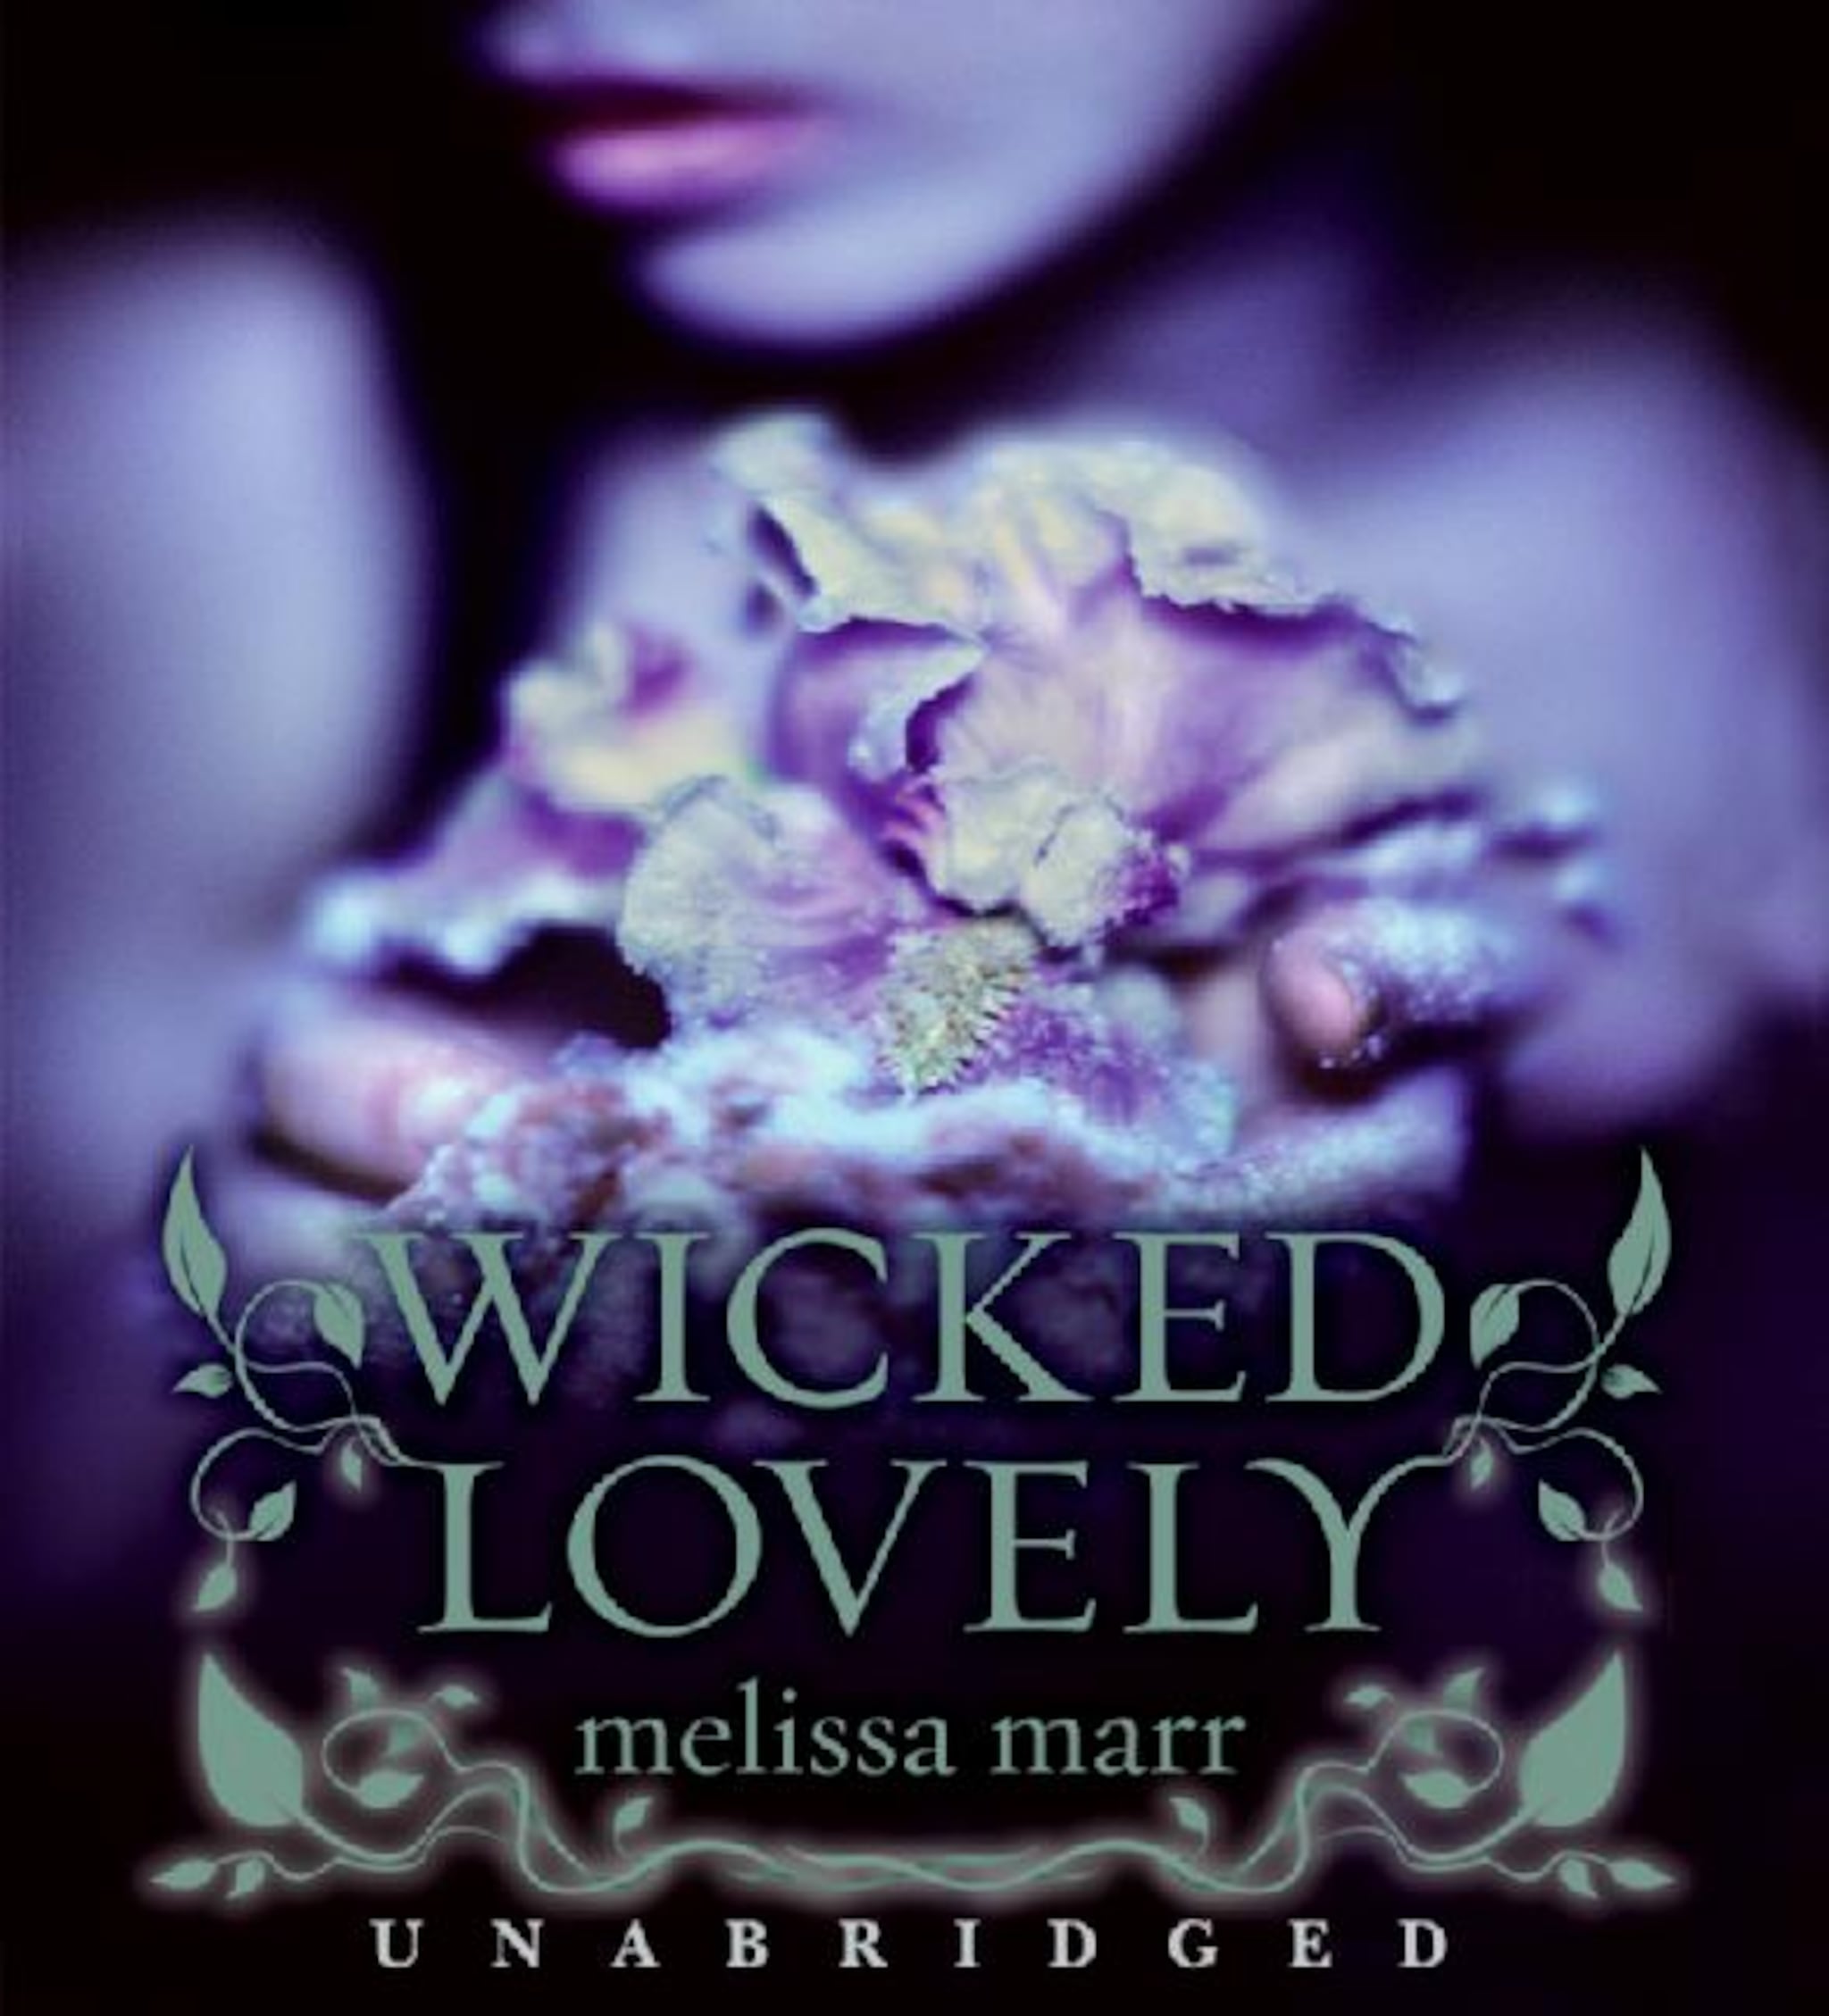 wicked lovely series